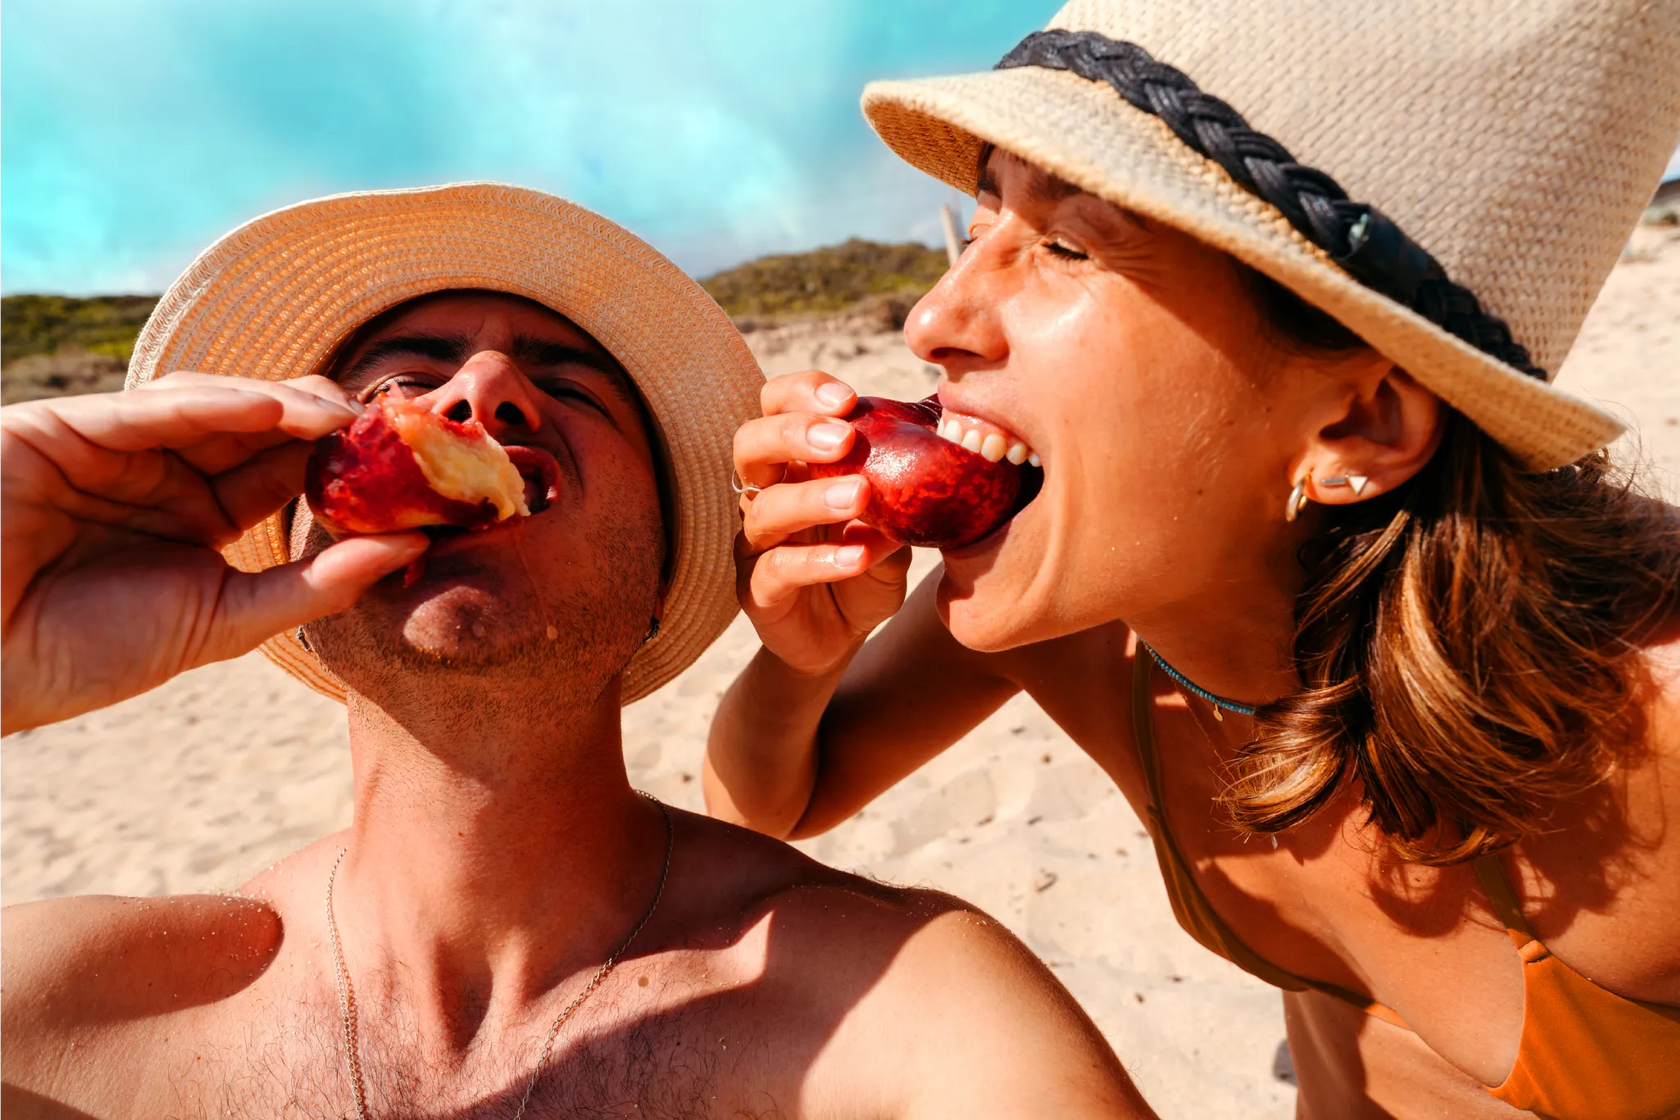 A couple biting into peaches while relaxing on a beach together